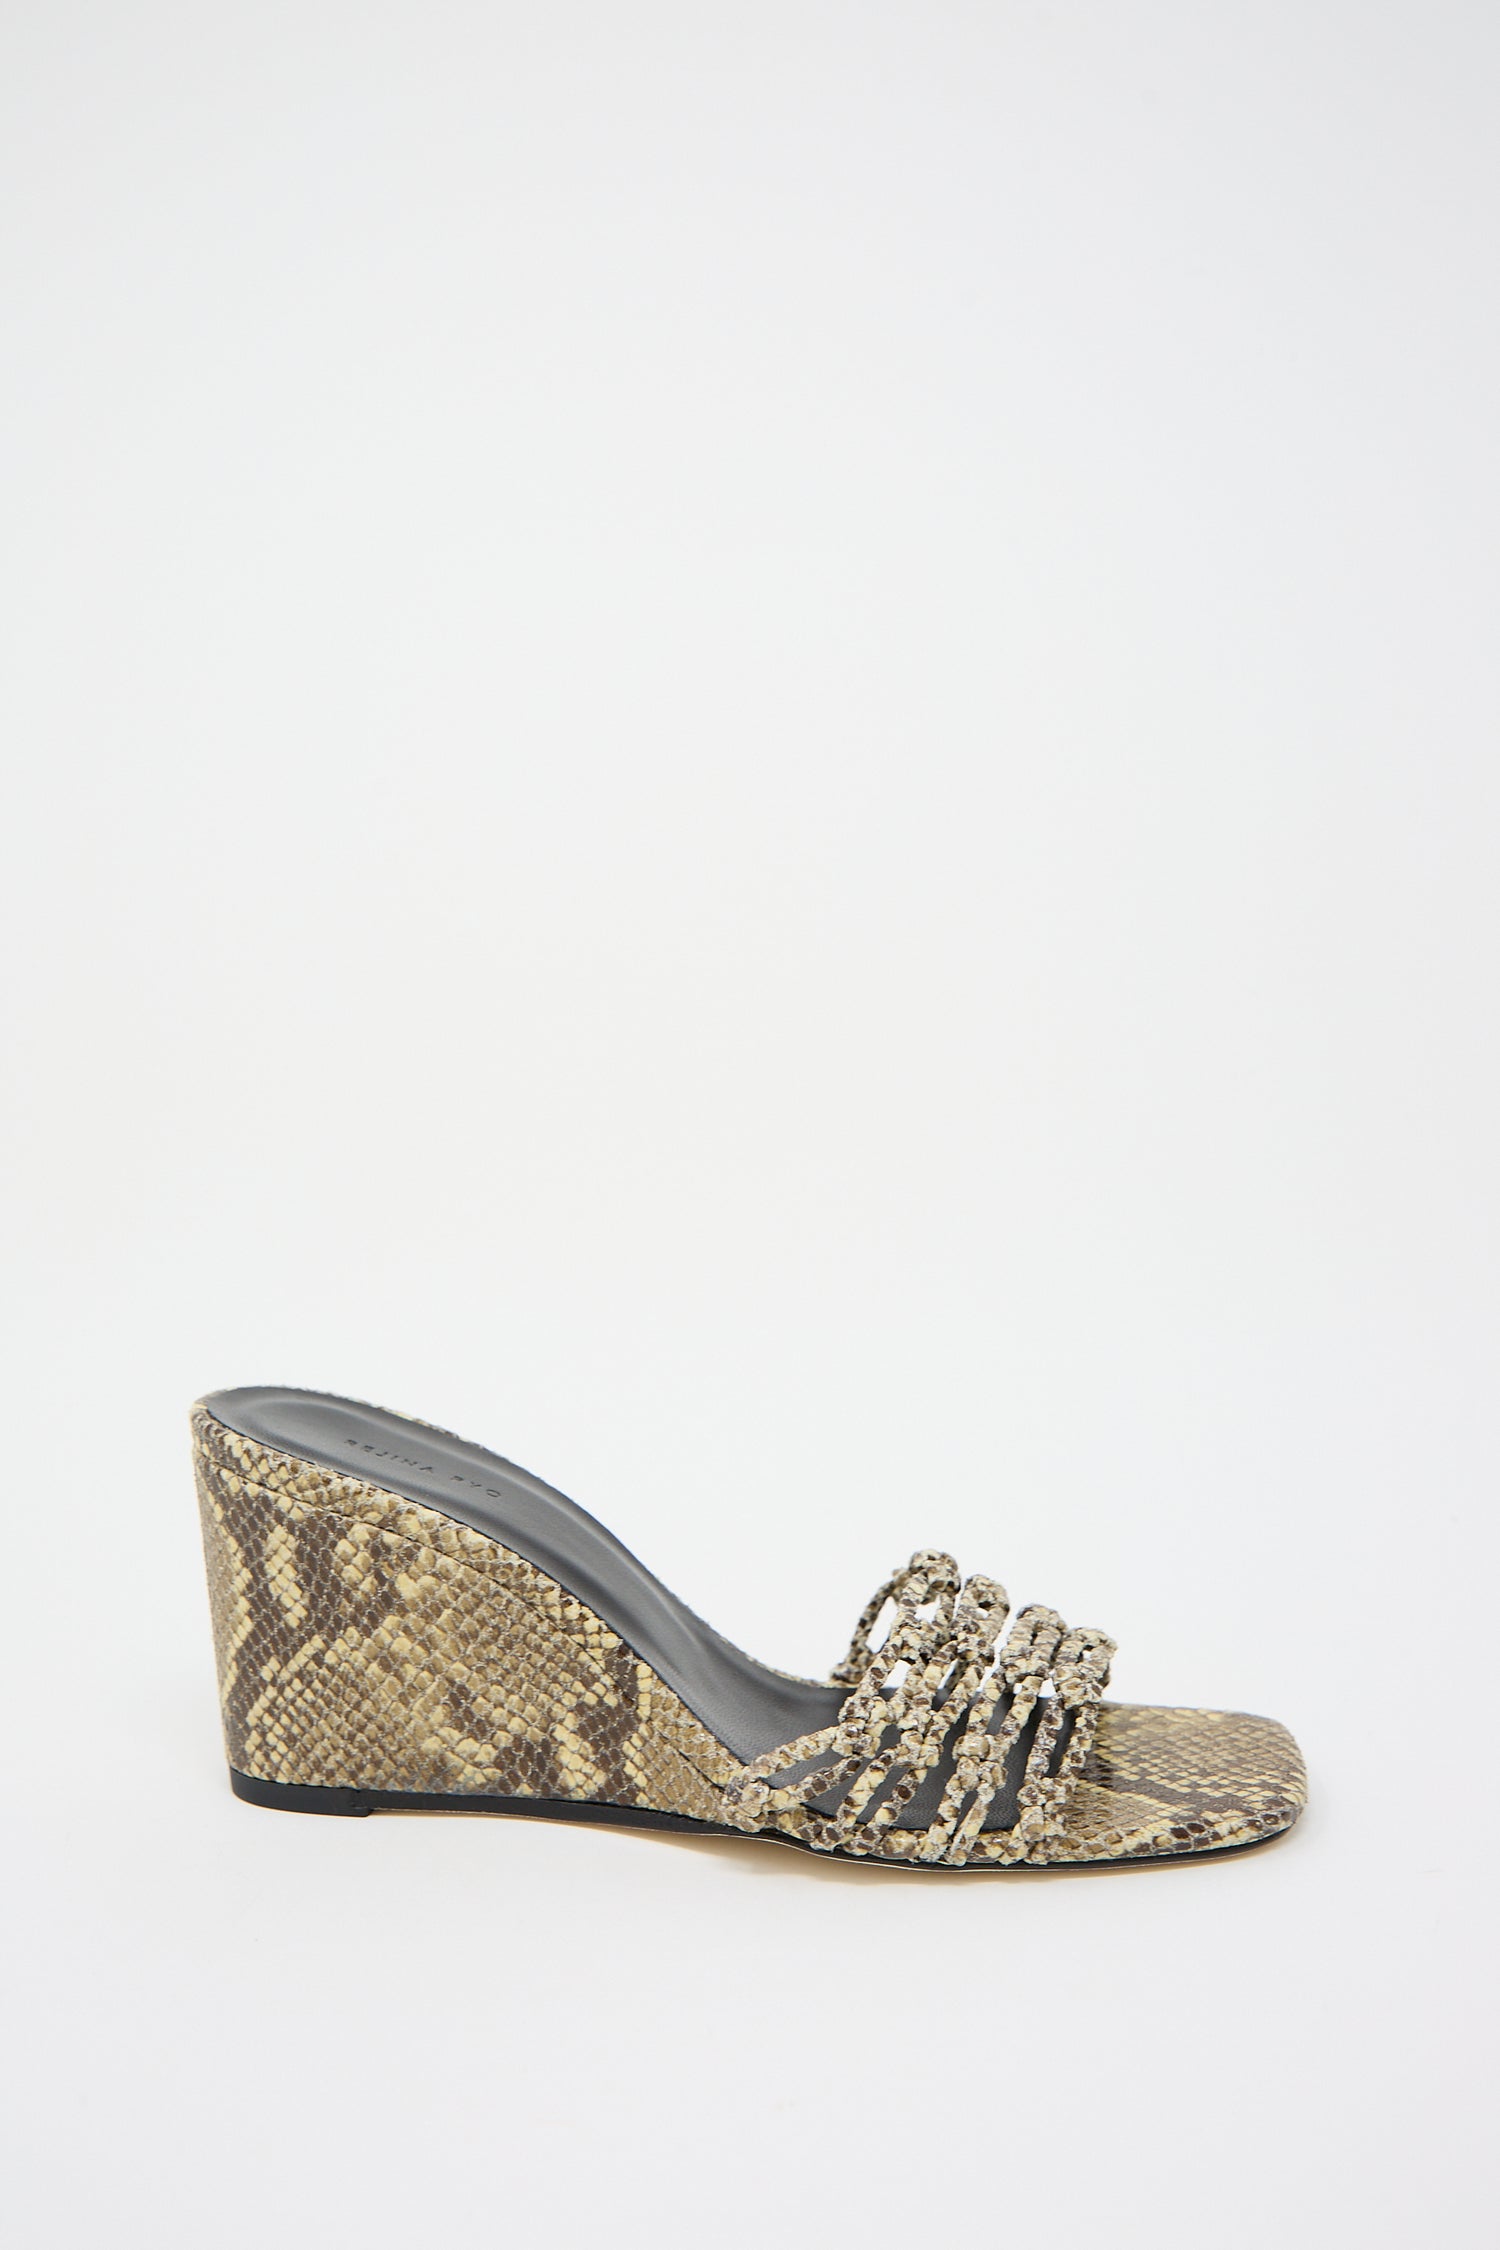 A single Rejina Pyo Leather Print Kyle wedge sandal in Snake Butter with embellishments and a woven front strap on a white background.